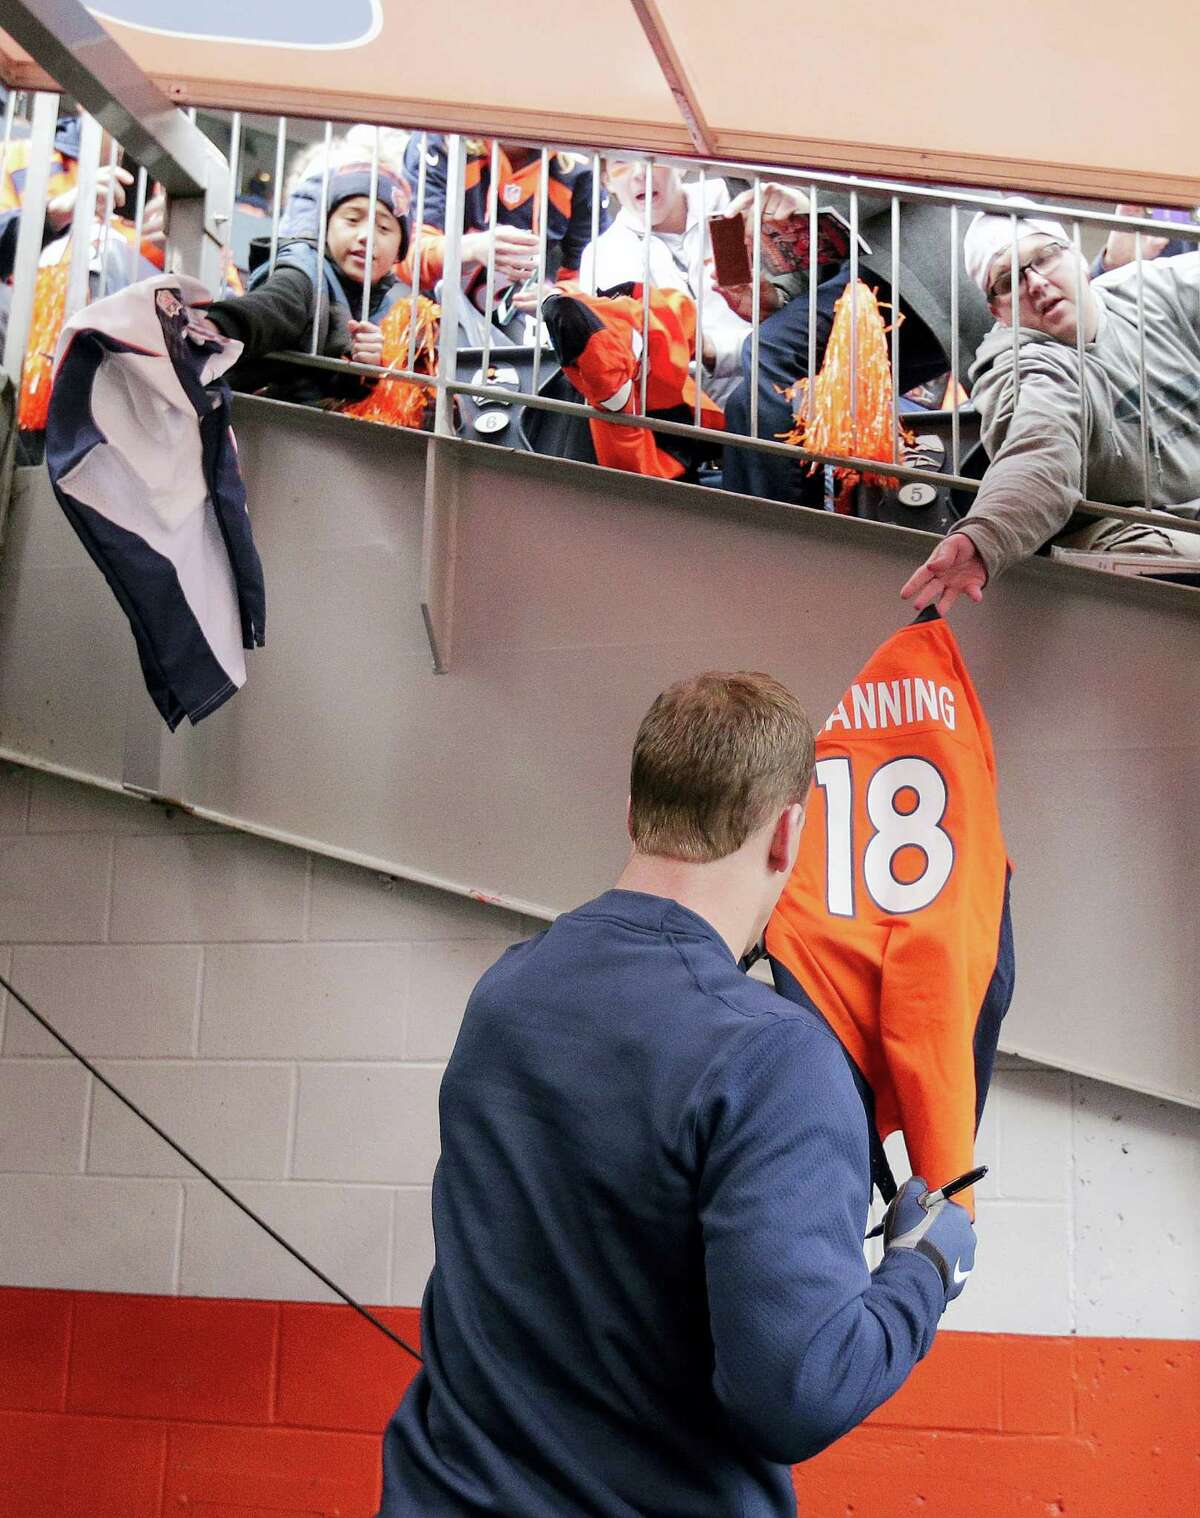 Peyton Manning signs autographs before the NFL football AFC Championship game between the Denver Broncos and the New England Patriots, Sunday, Jan. 24, 2016, in Denver. (AP Photo/Charlie Riedel)